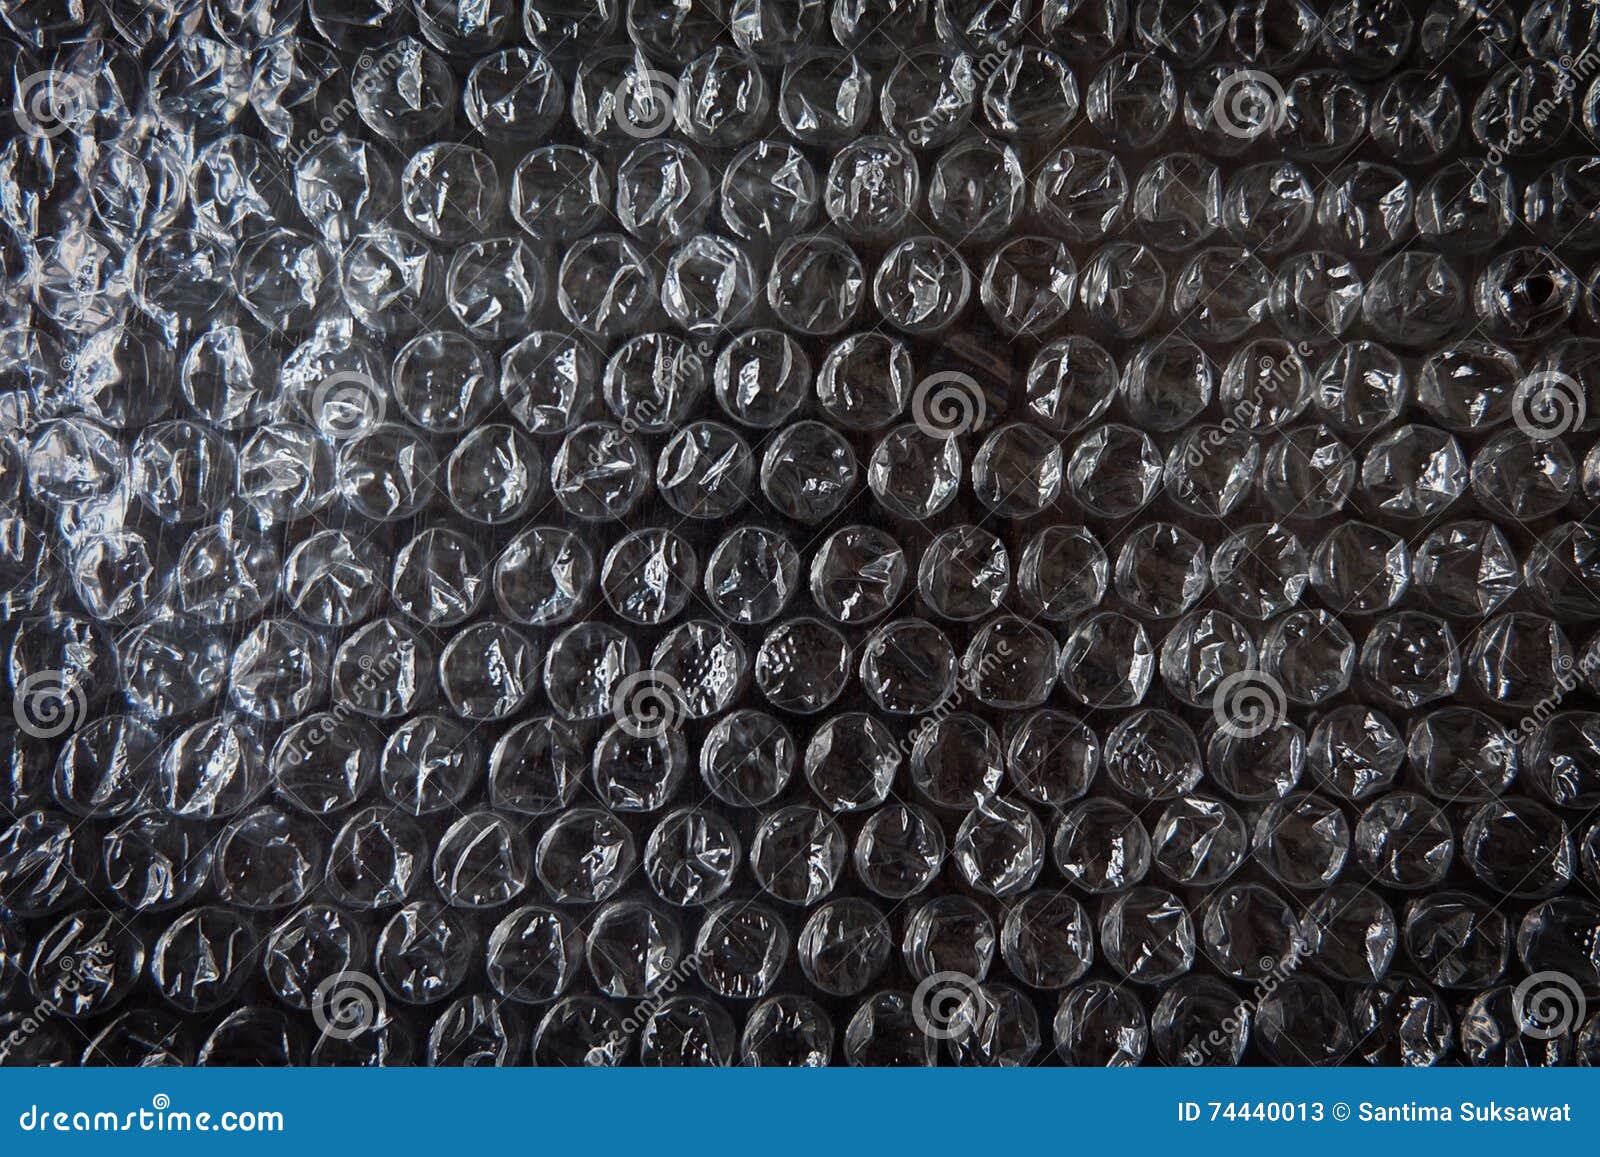 Bubble Wrap Background Wallpaper Stock Photo  Image of fragile clear  74439894